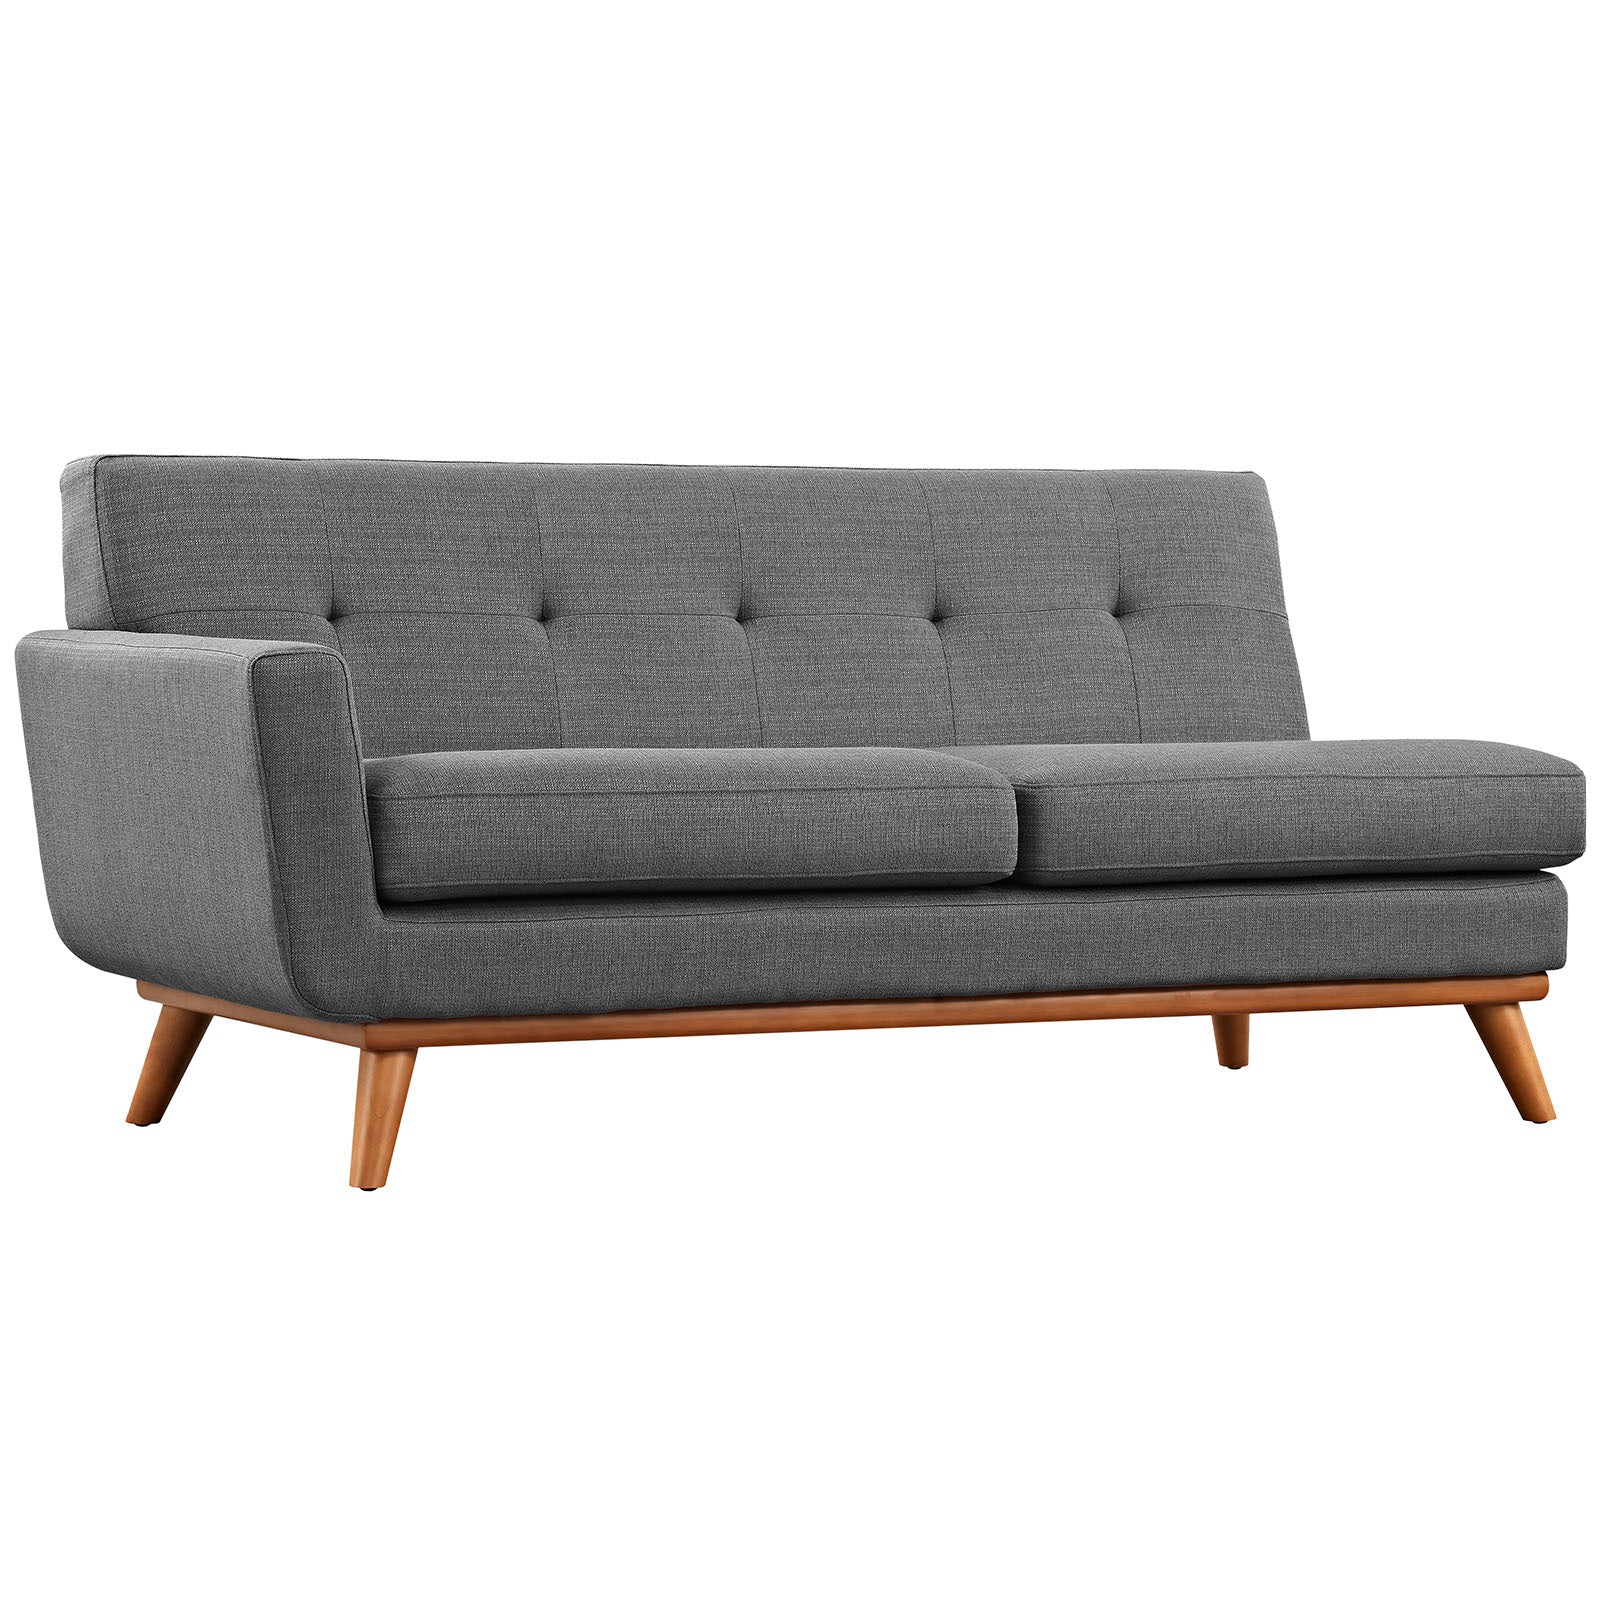 Modway Sectional Sofas - Engage Right-Facing Fabric Sectional Sofa Gray